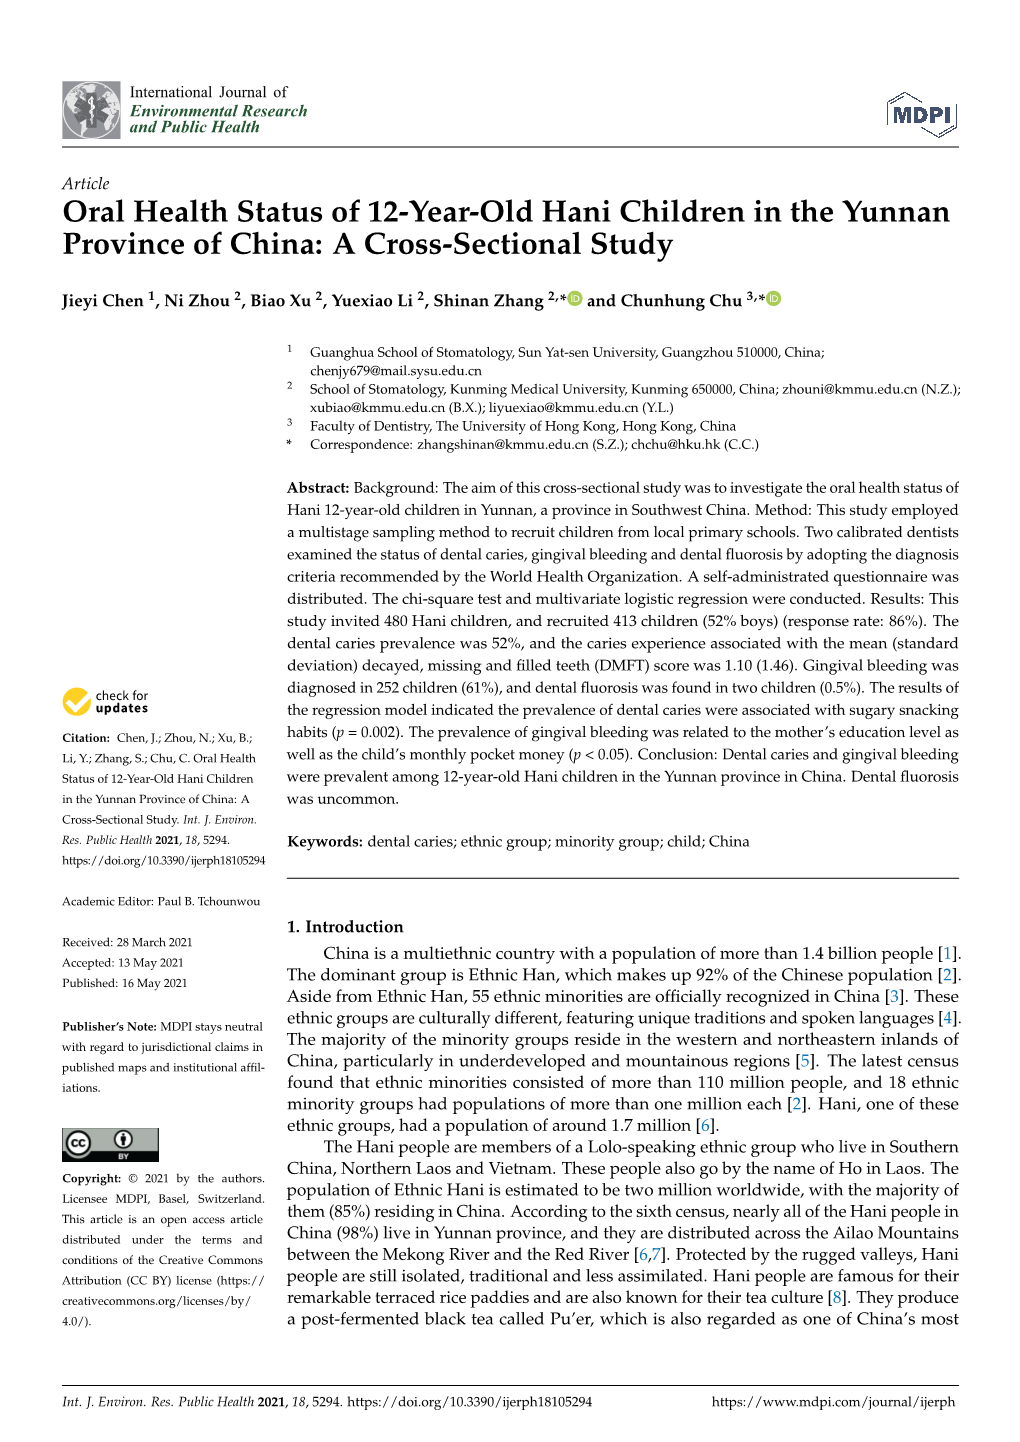 Oral Health Status of 12-Year-Old Hani Children in the Yunnan Province of China: a Cross-Sectional Study